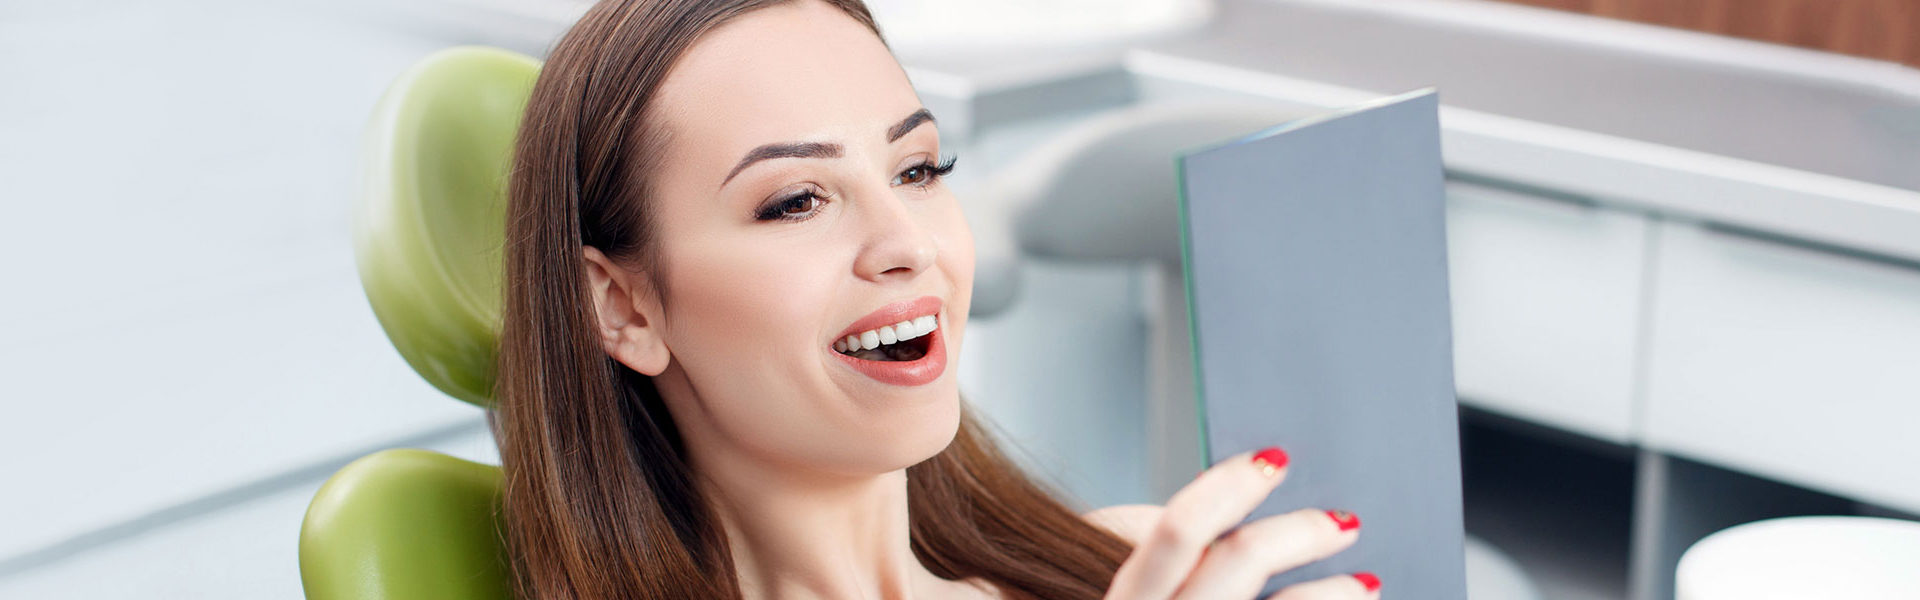 Root Canal Treatment in Cupertino, CA | Root Canal Near You